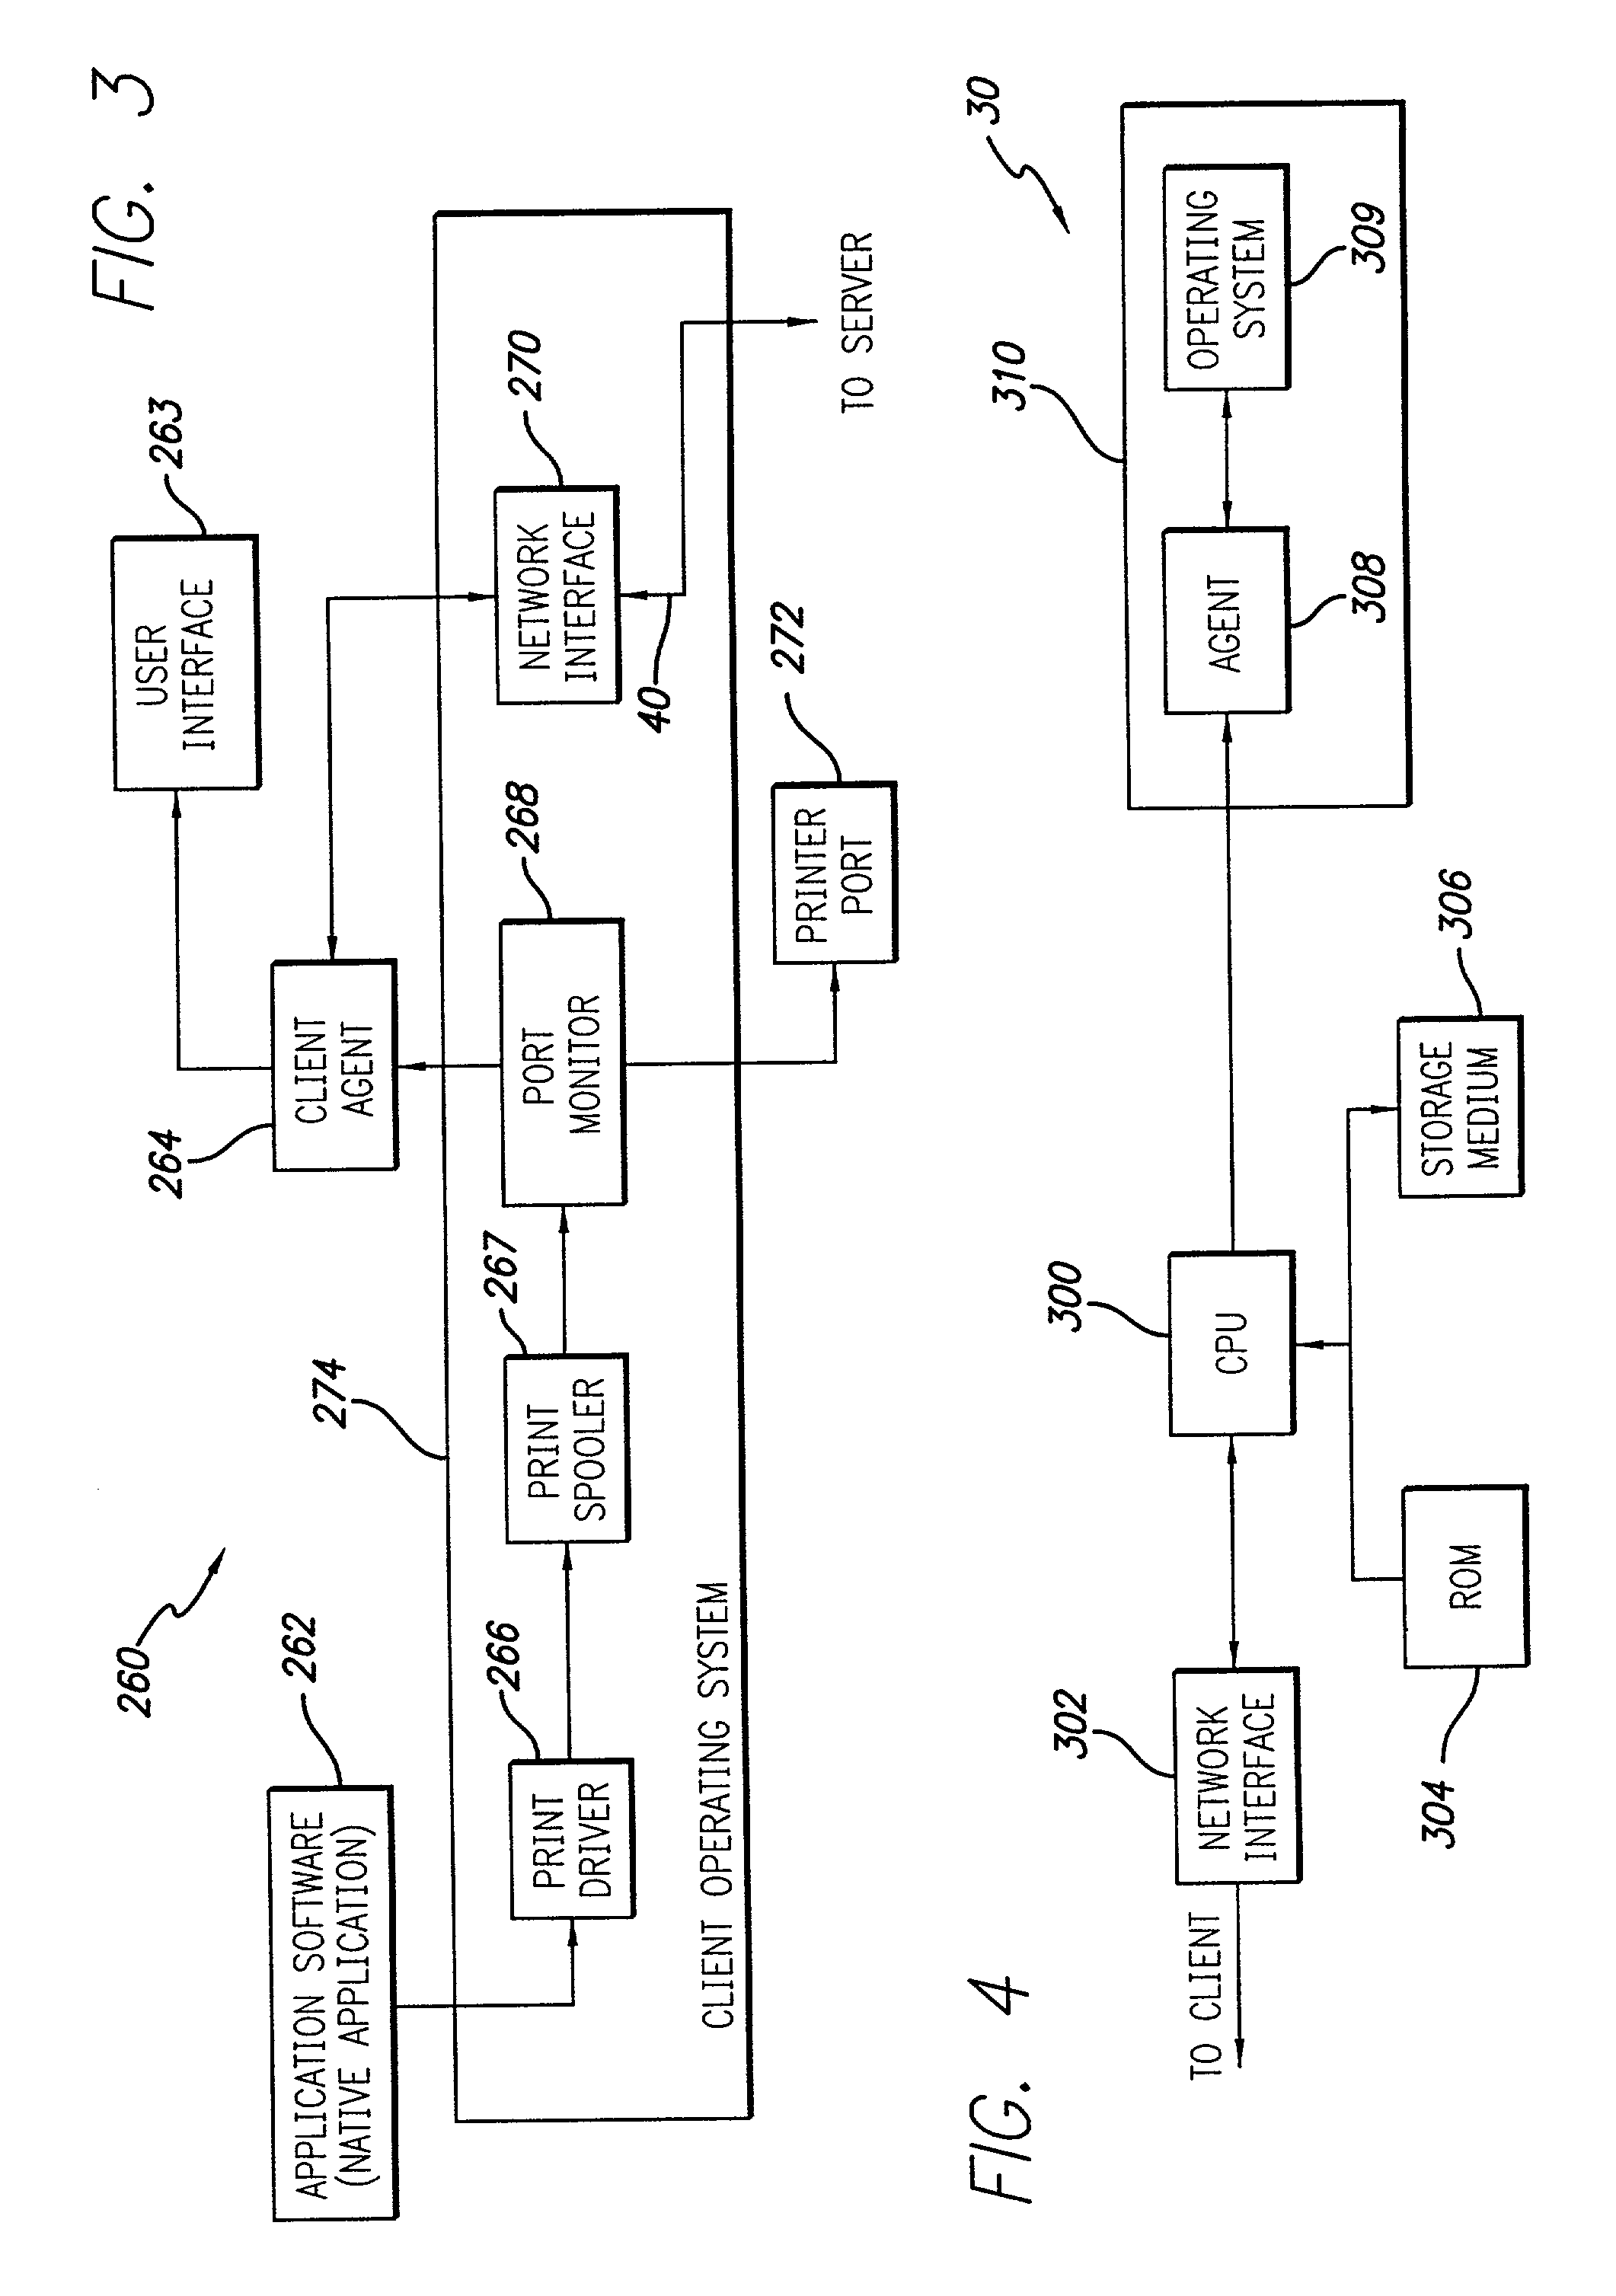 System and method for electronic document distribution